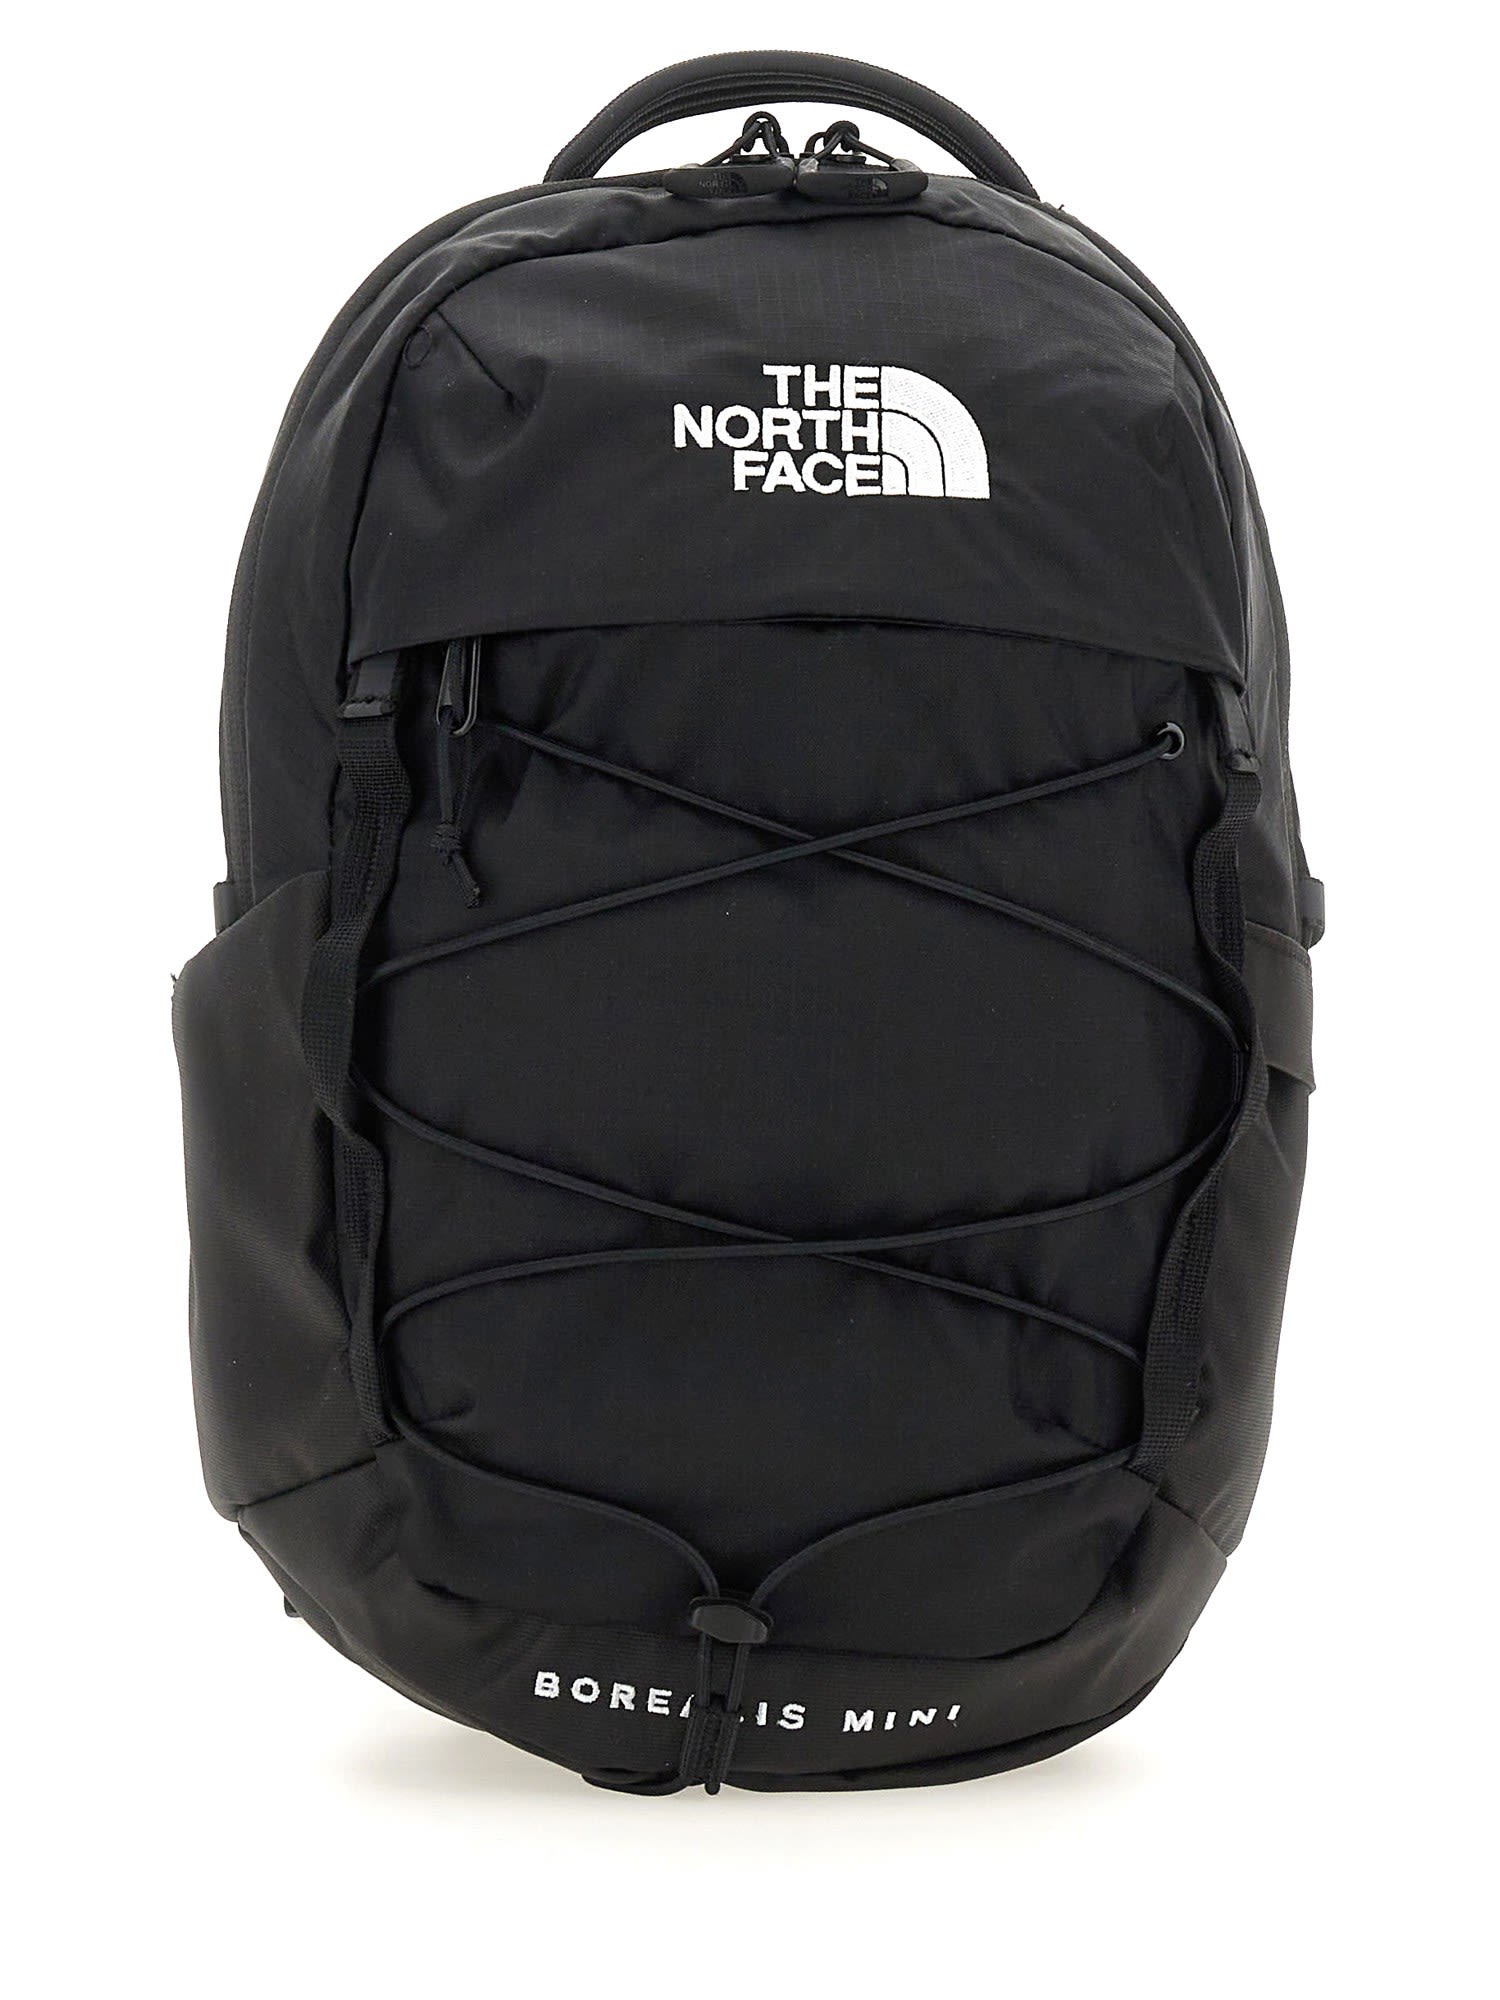 The North Face Mini Borealis Backpack In Black